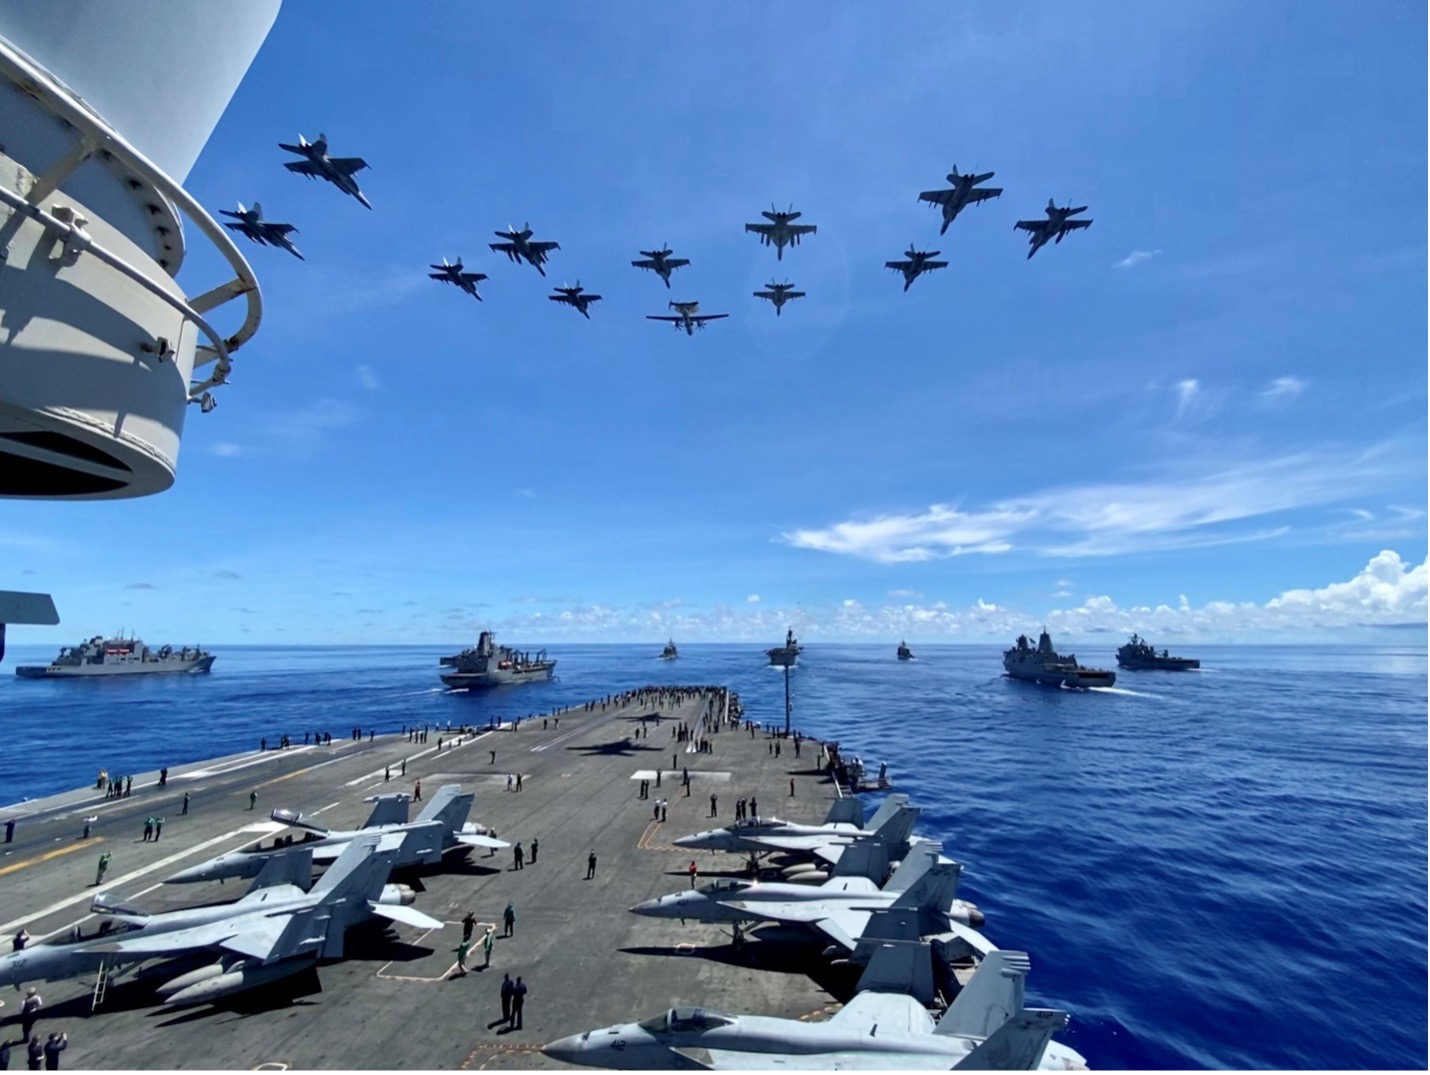 Military aircrafts taking off from a ship